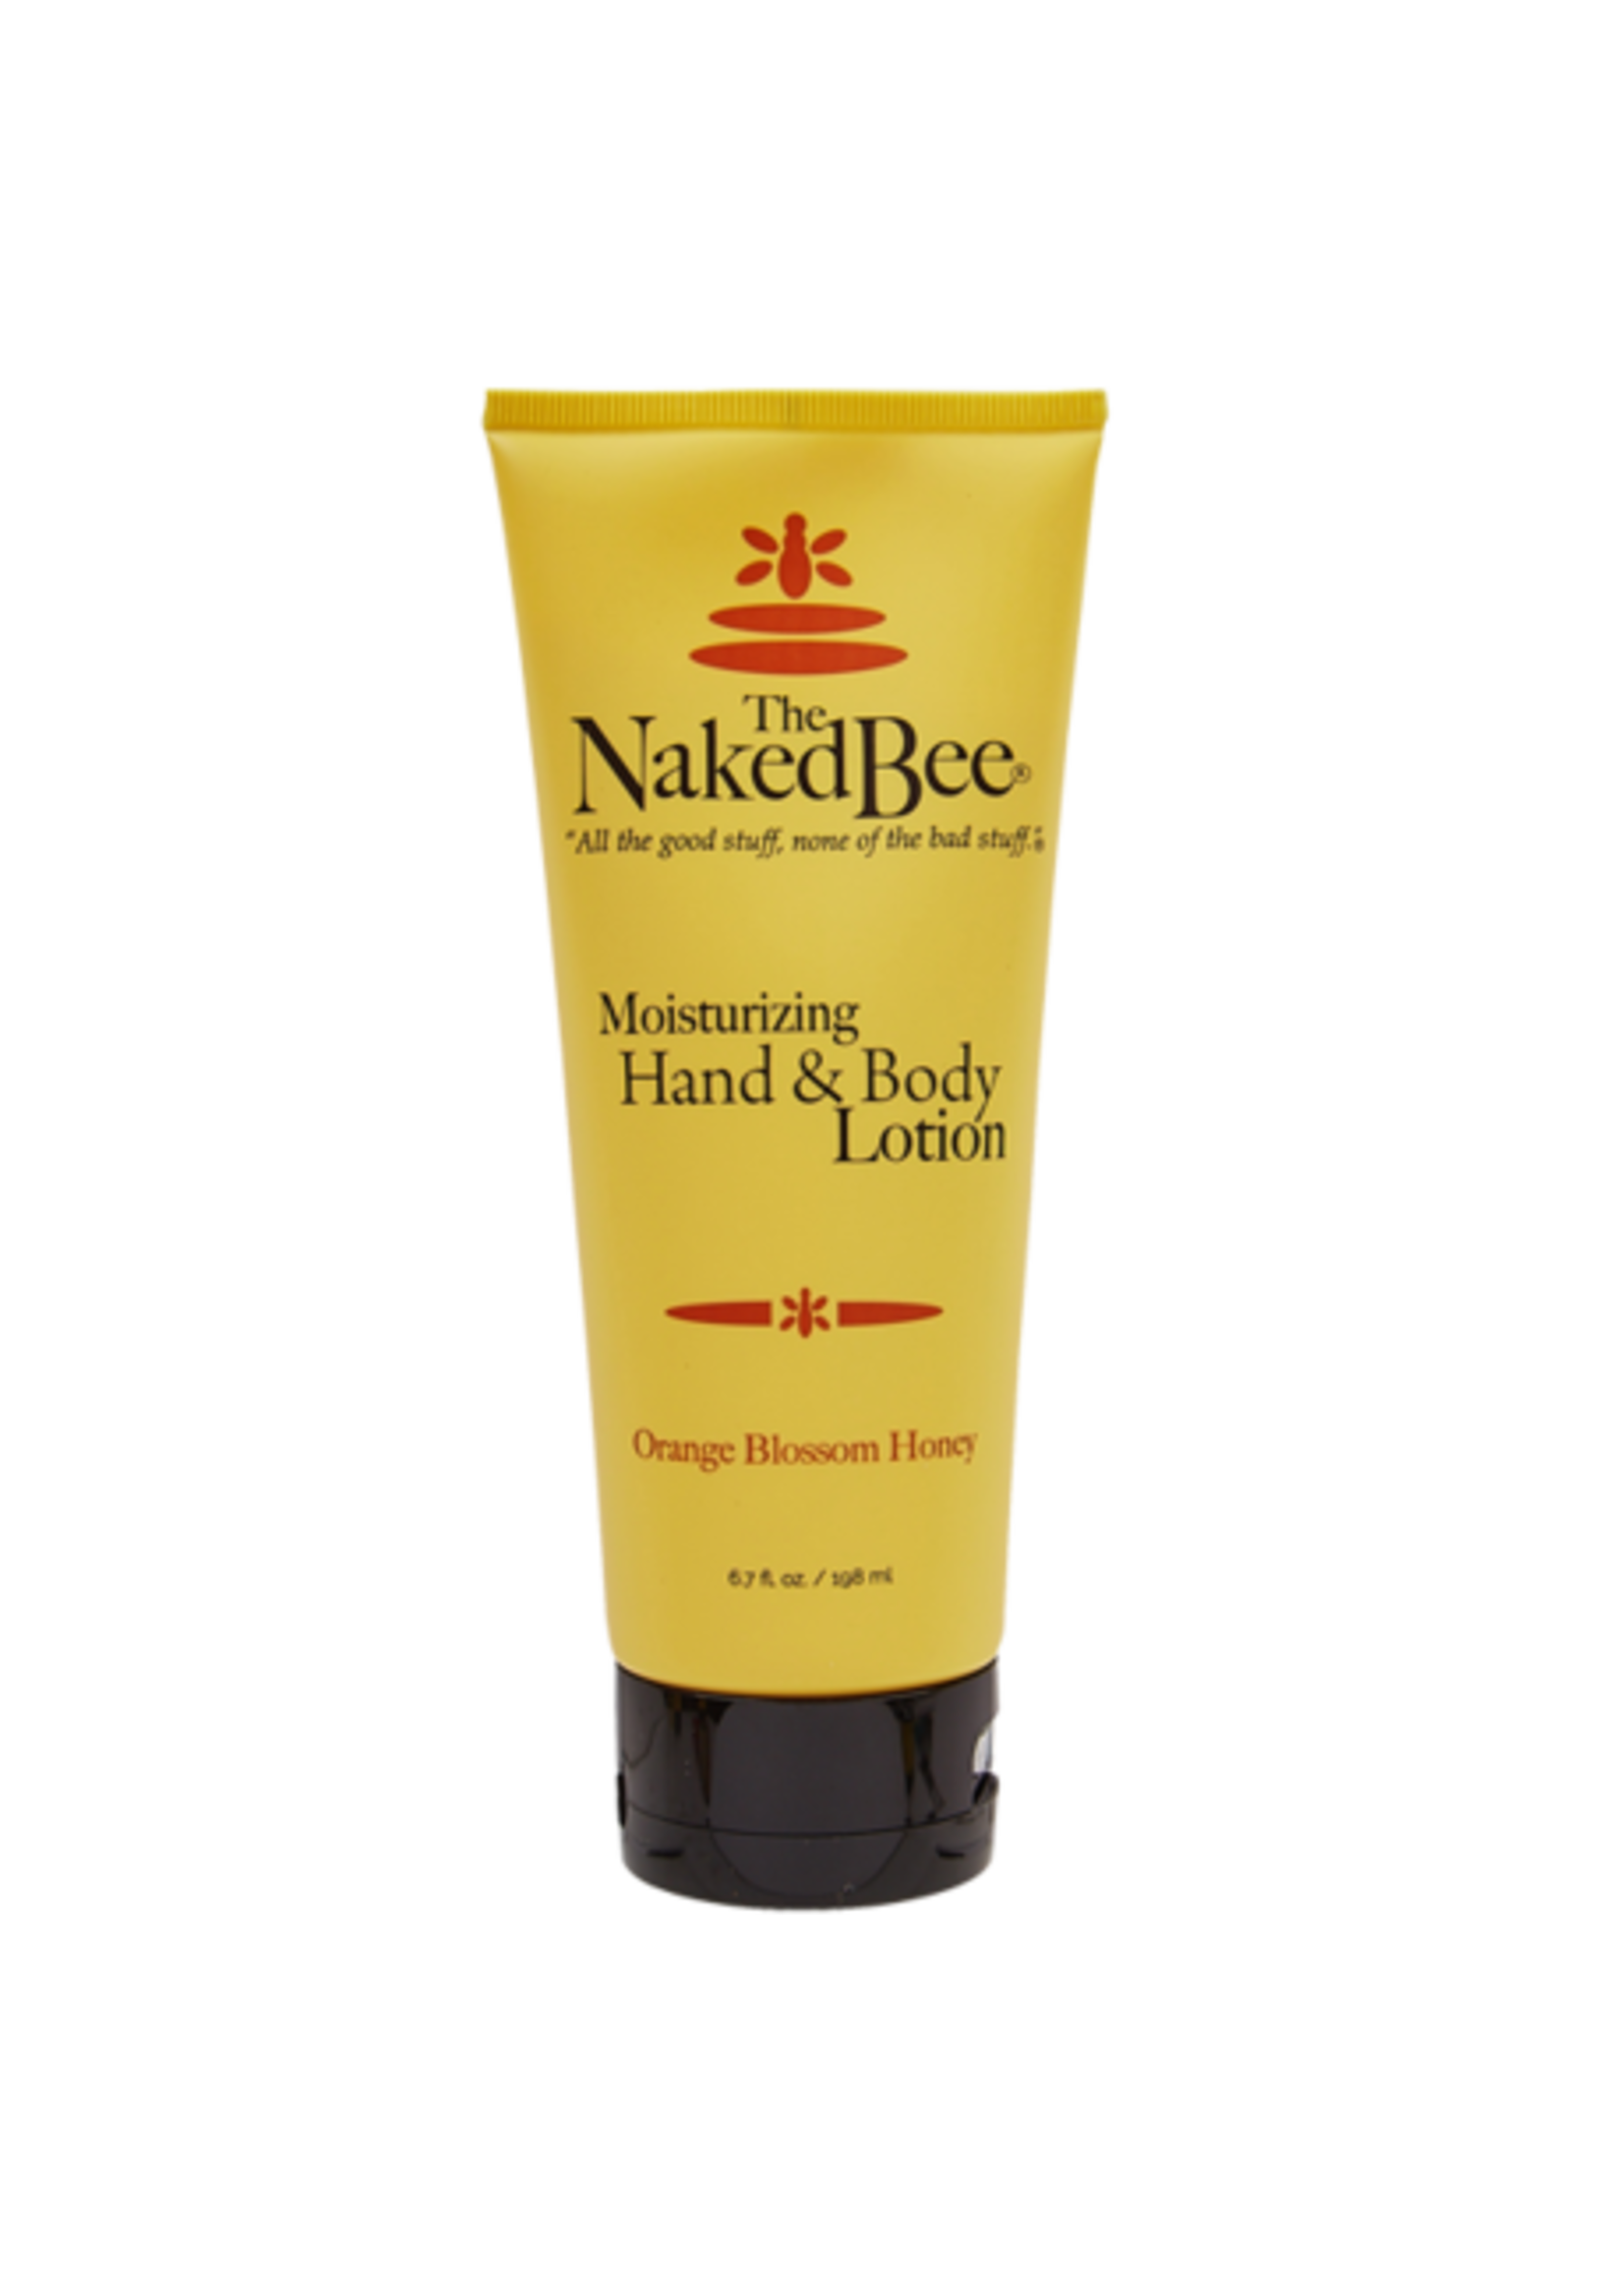 The Naked Bee Hand & Body Lotion 6.7 oz